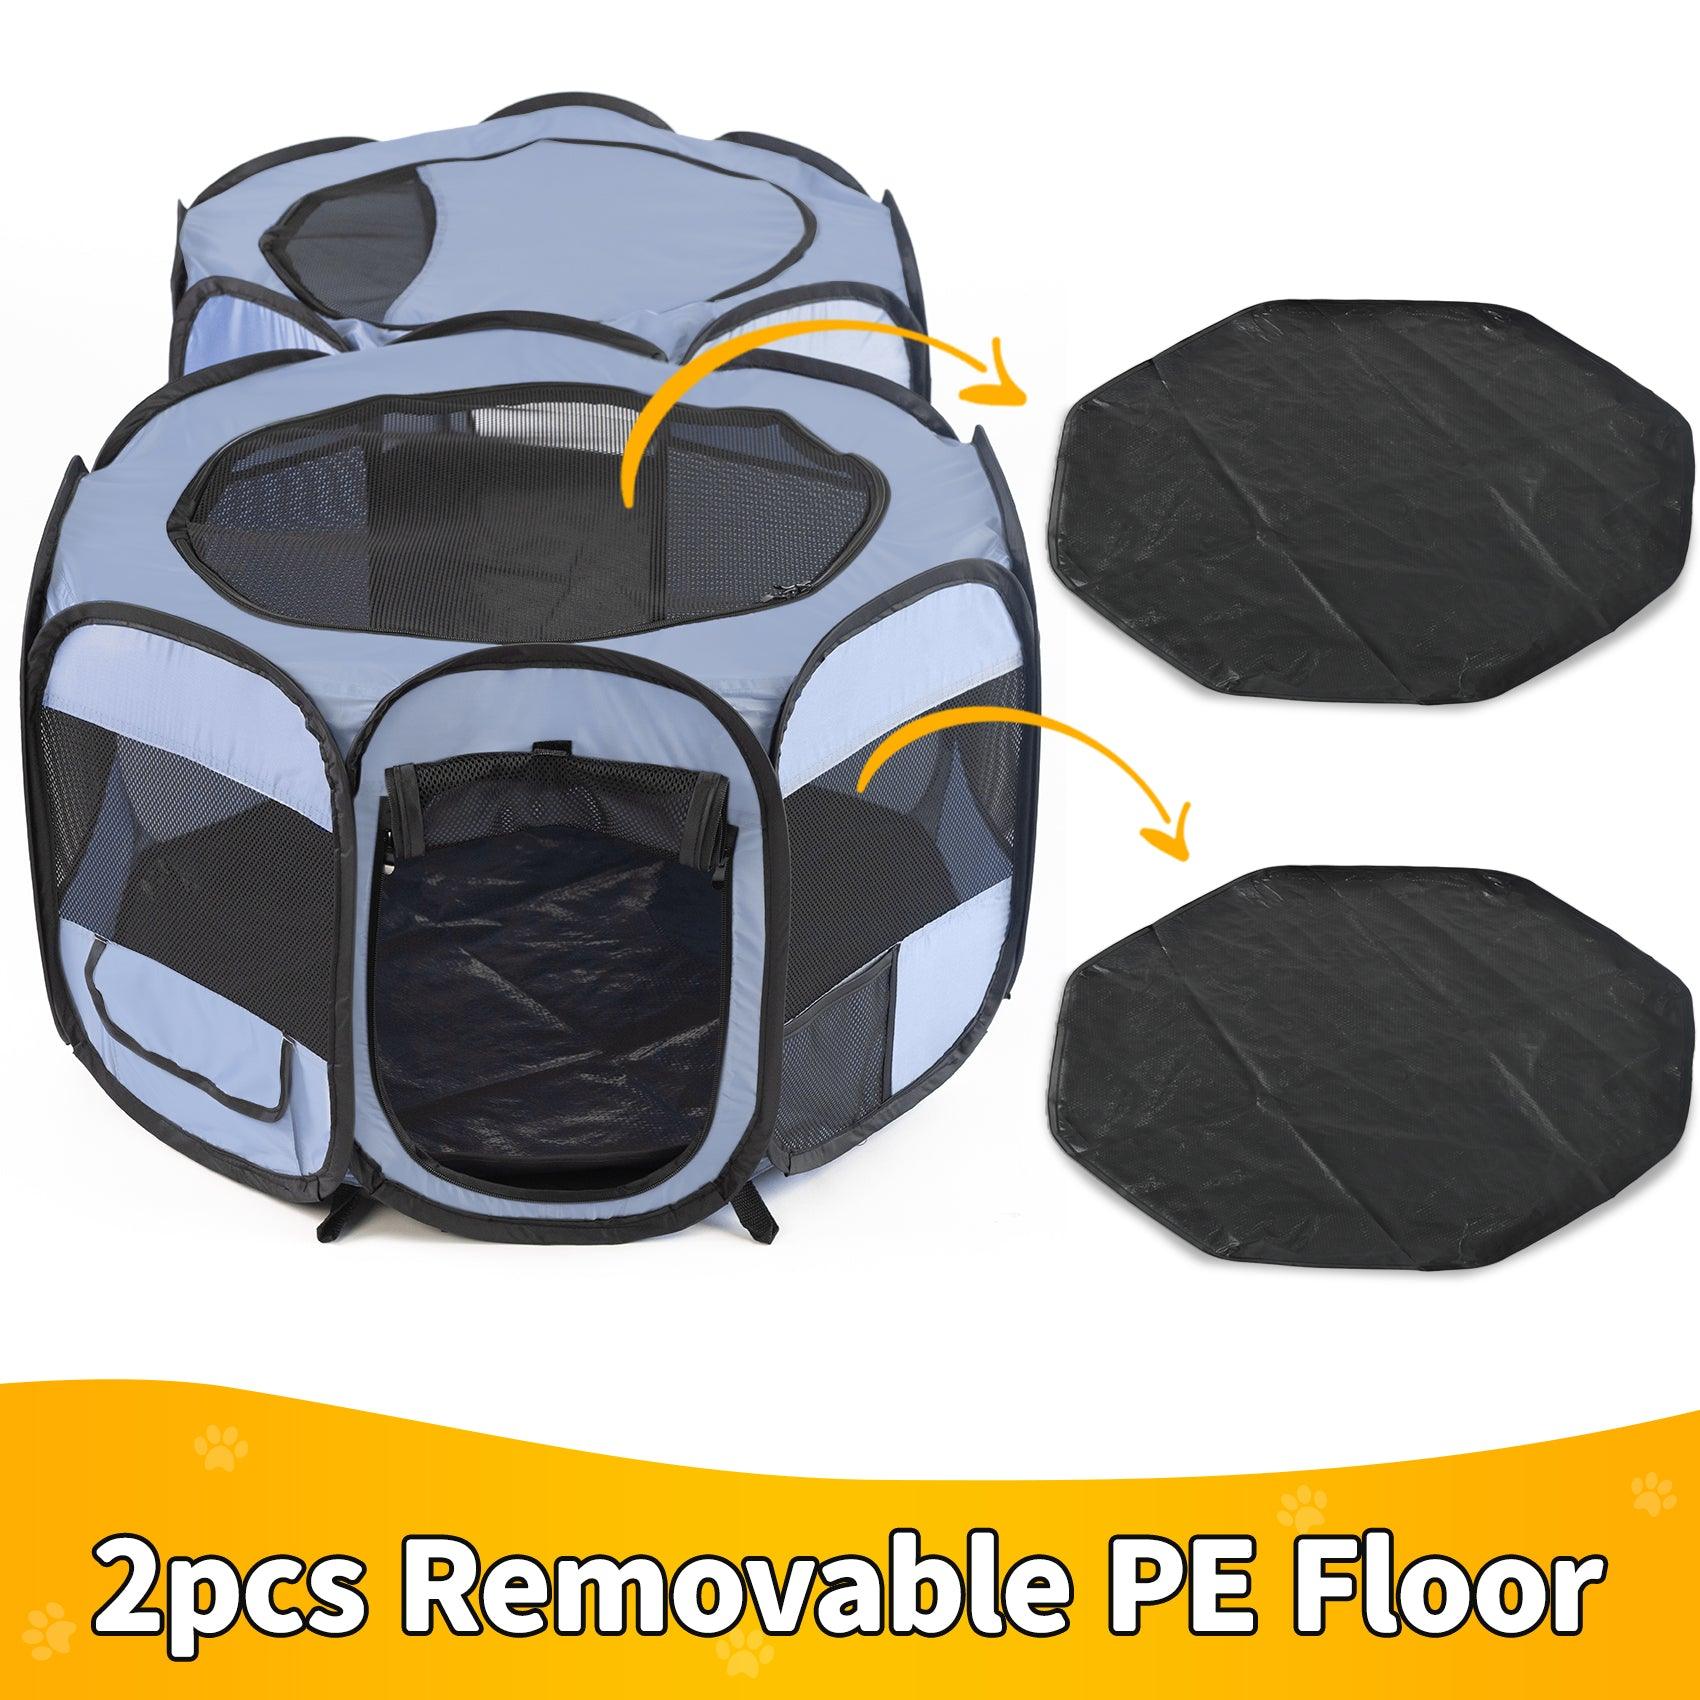 Give away 2 removable PE floor mat will not stain the floor.